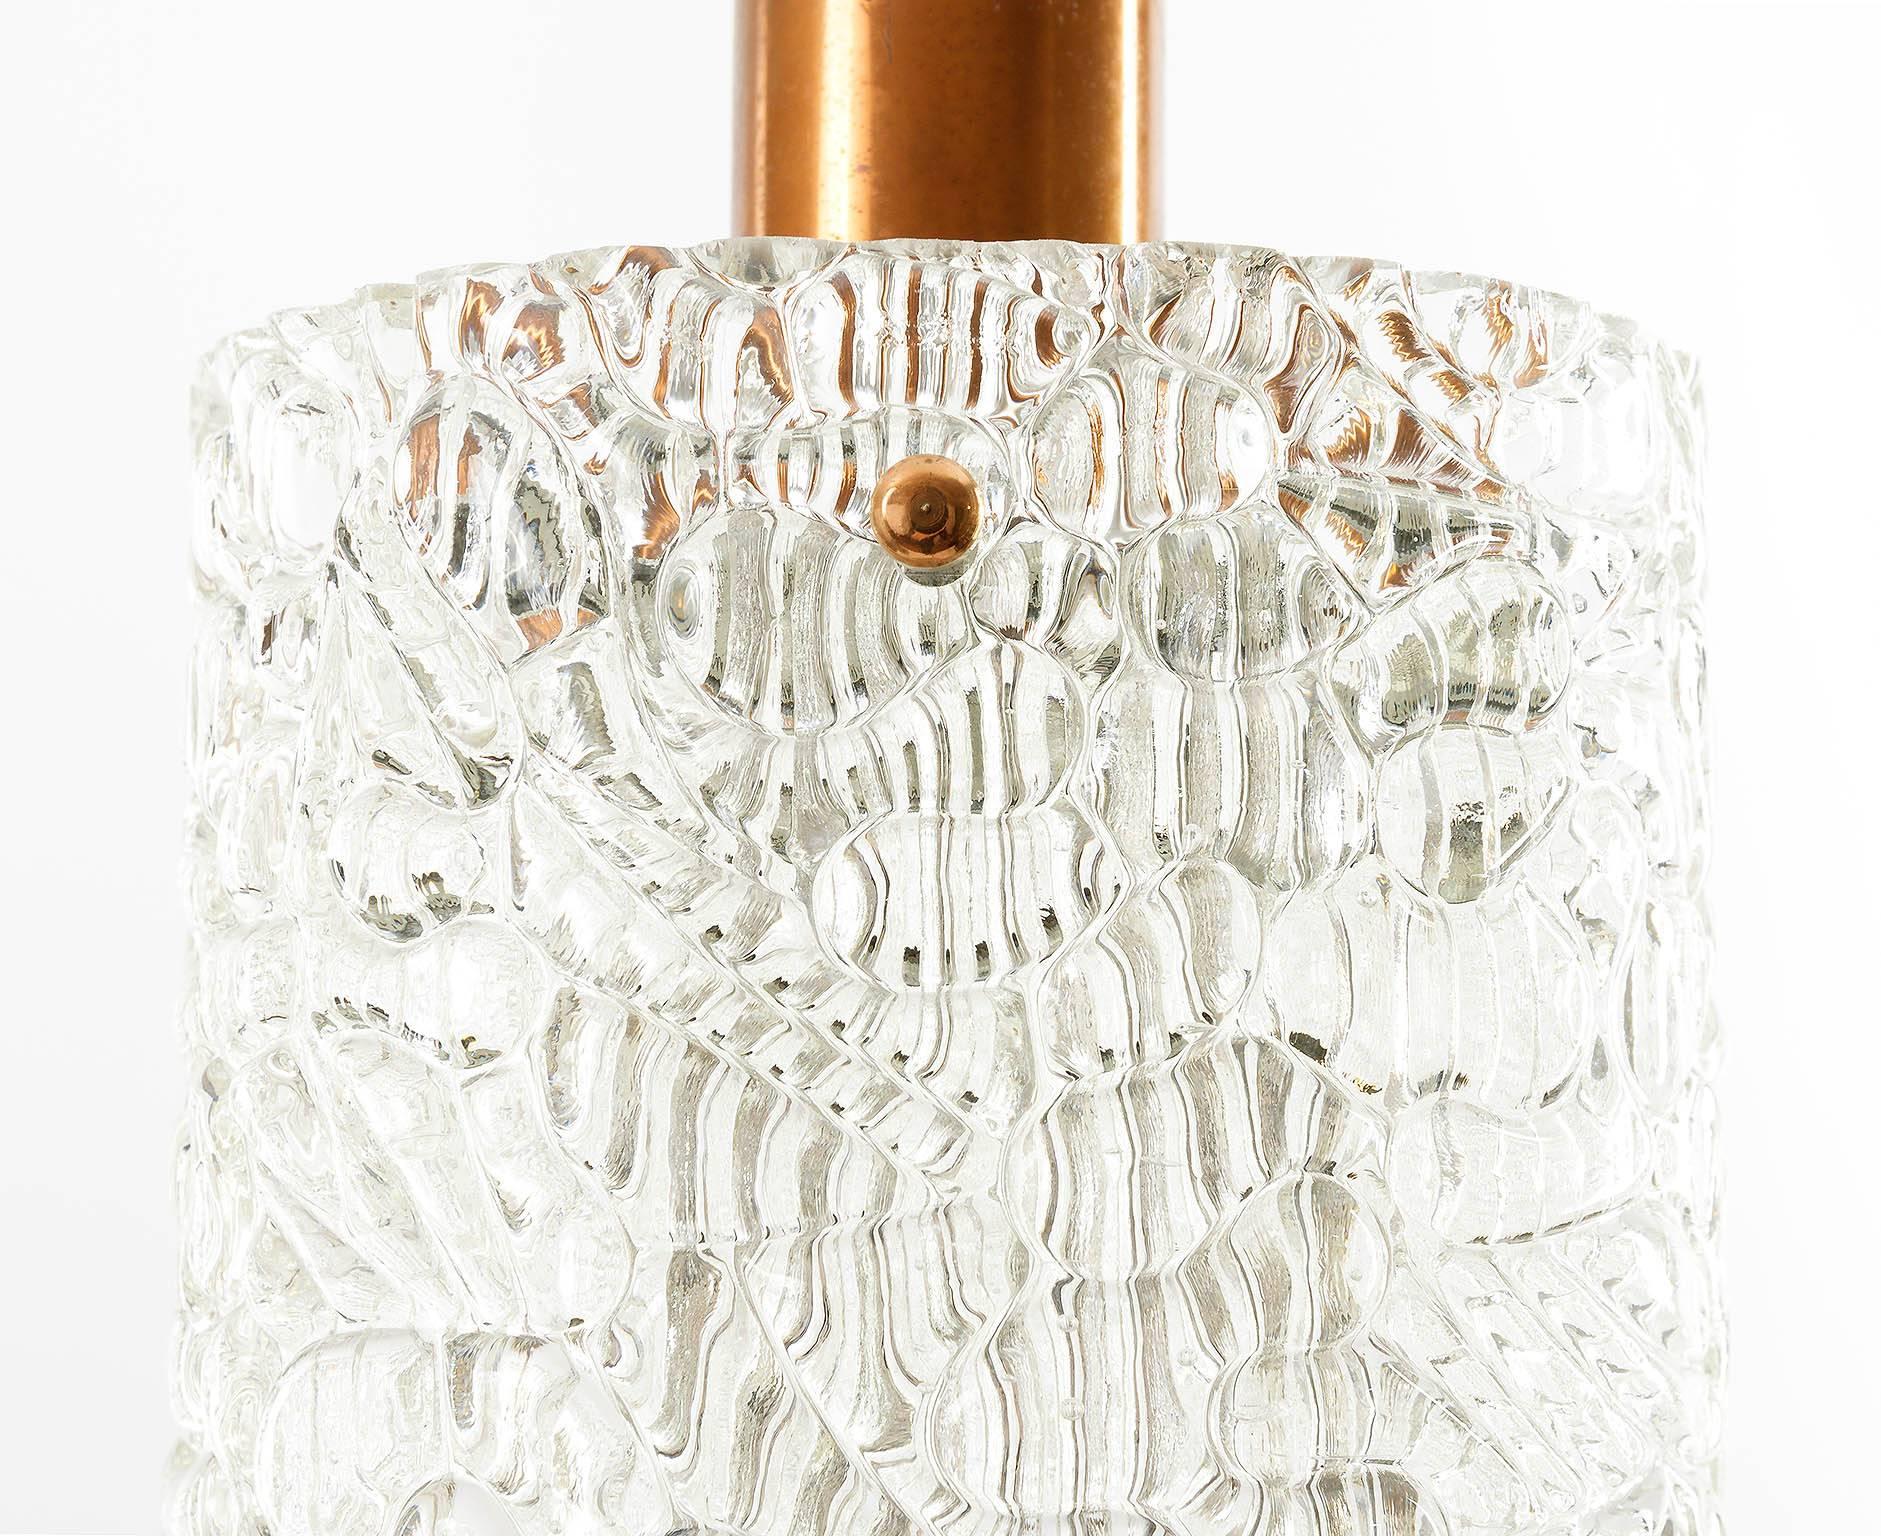 Austrian One of Six Kalmar Pendant Lights, Textured Glass and Patinated Copper, 1950s For Sale